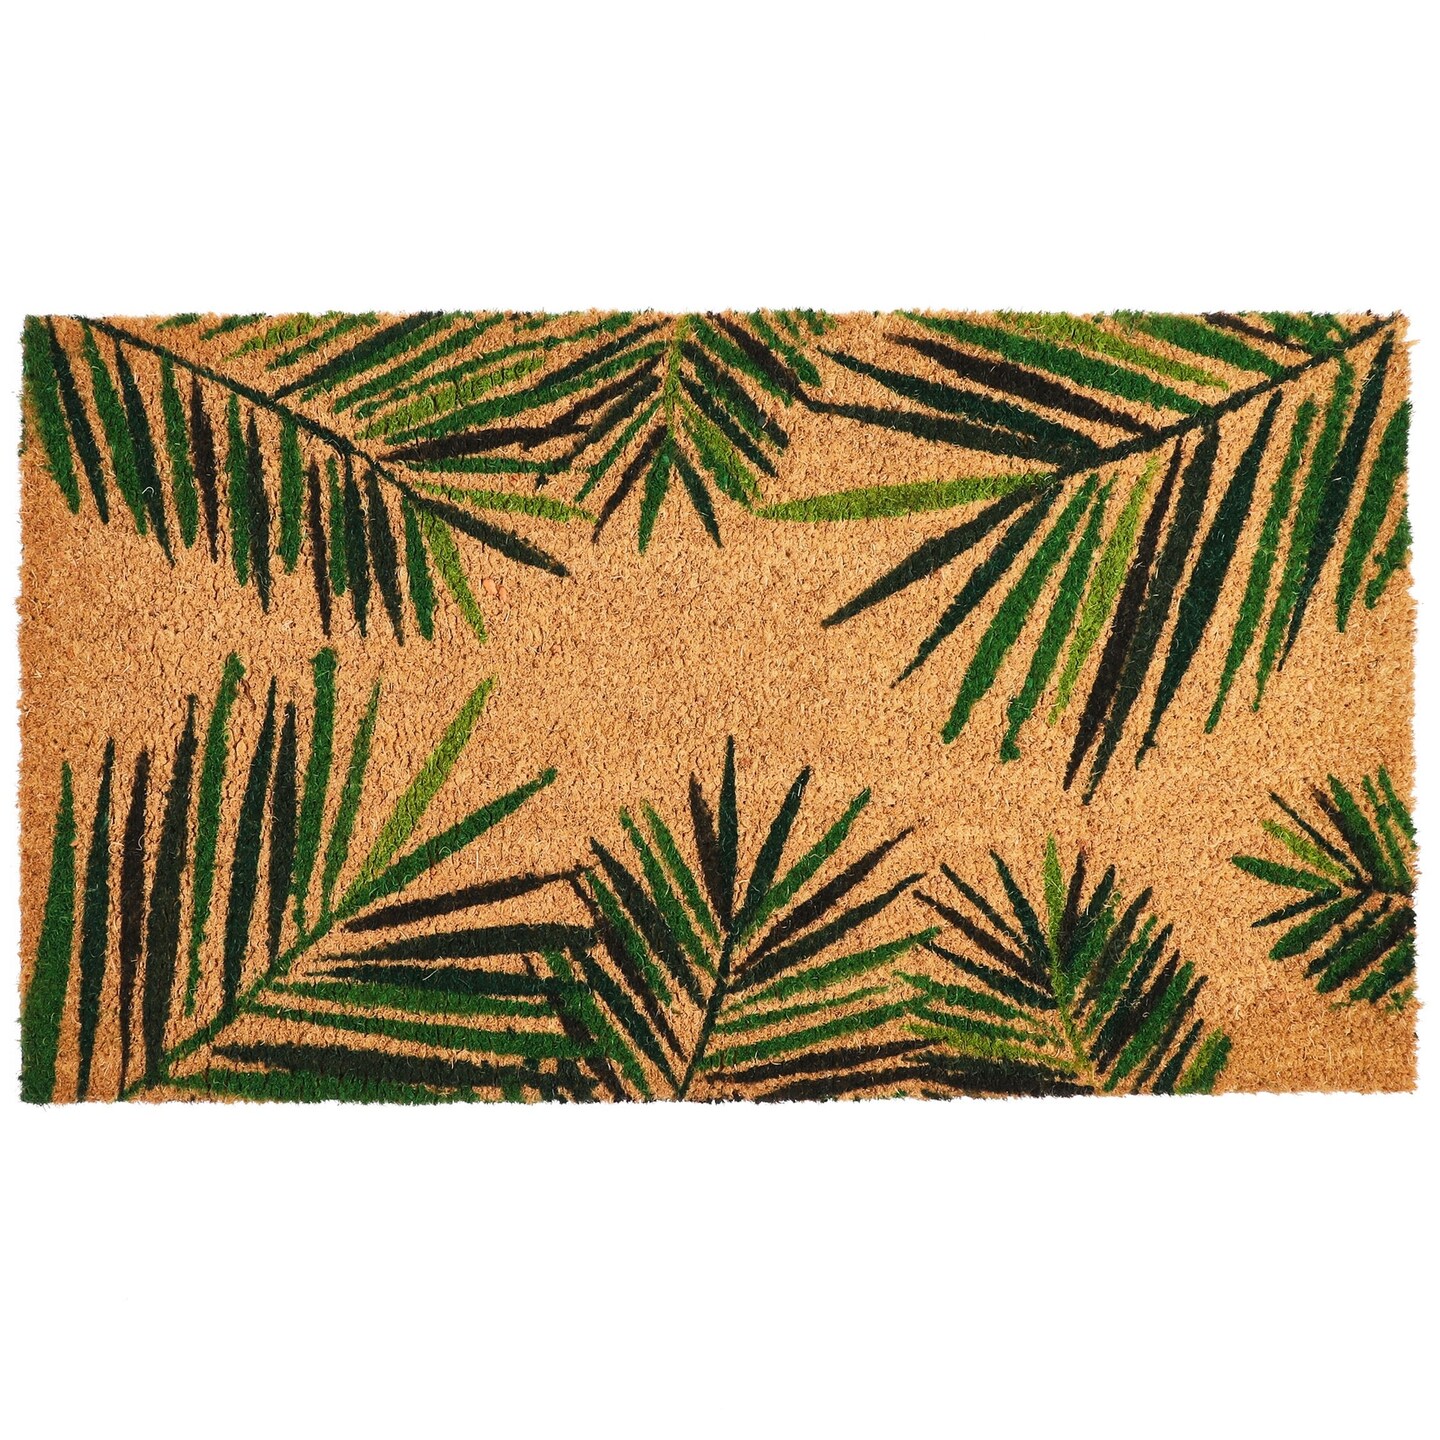 Tropical Welcome Mat for Outdoor Entrance, Coco Coir Palm Leaf